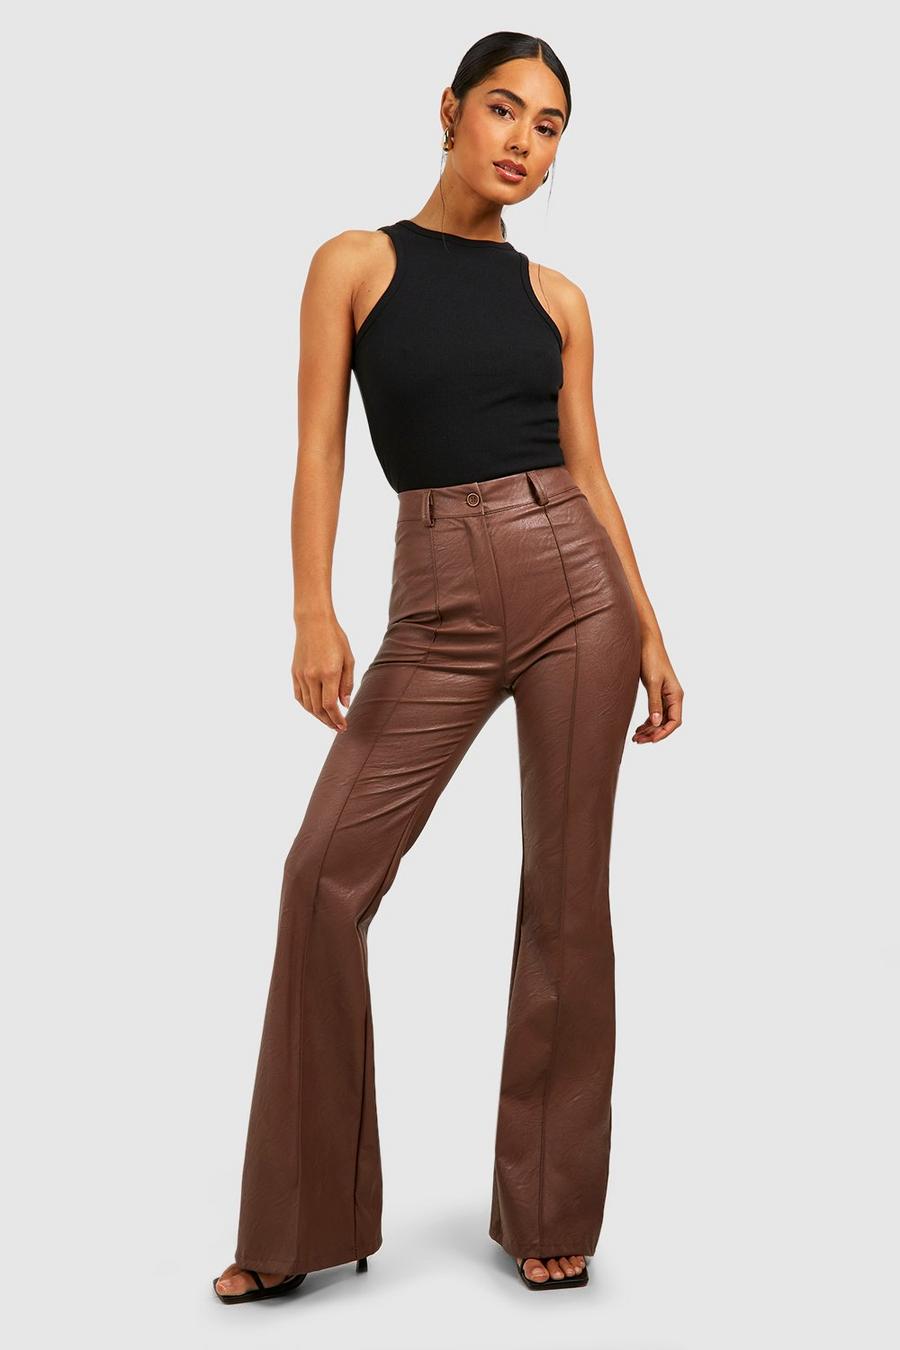 Chocolate brun Leather Look High Waisted Seam Front Flared Trousers